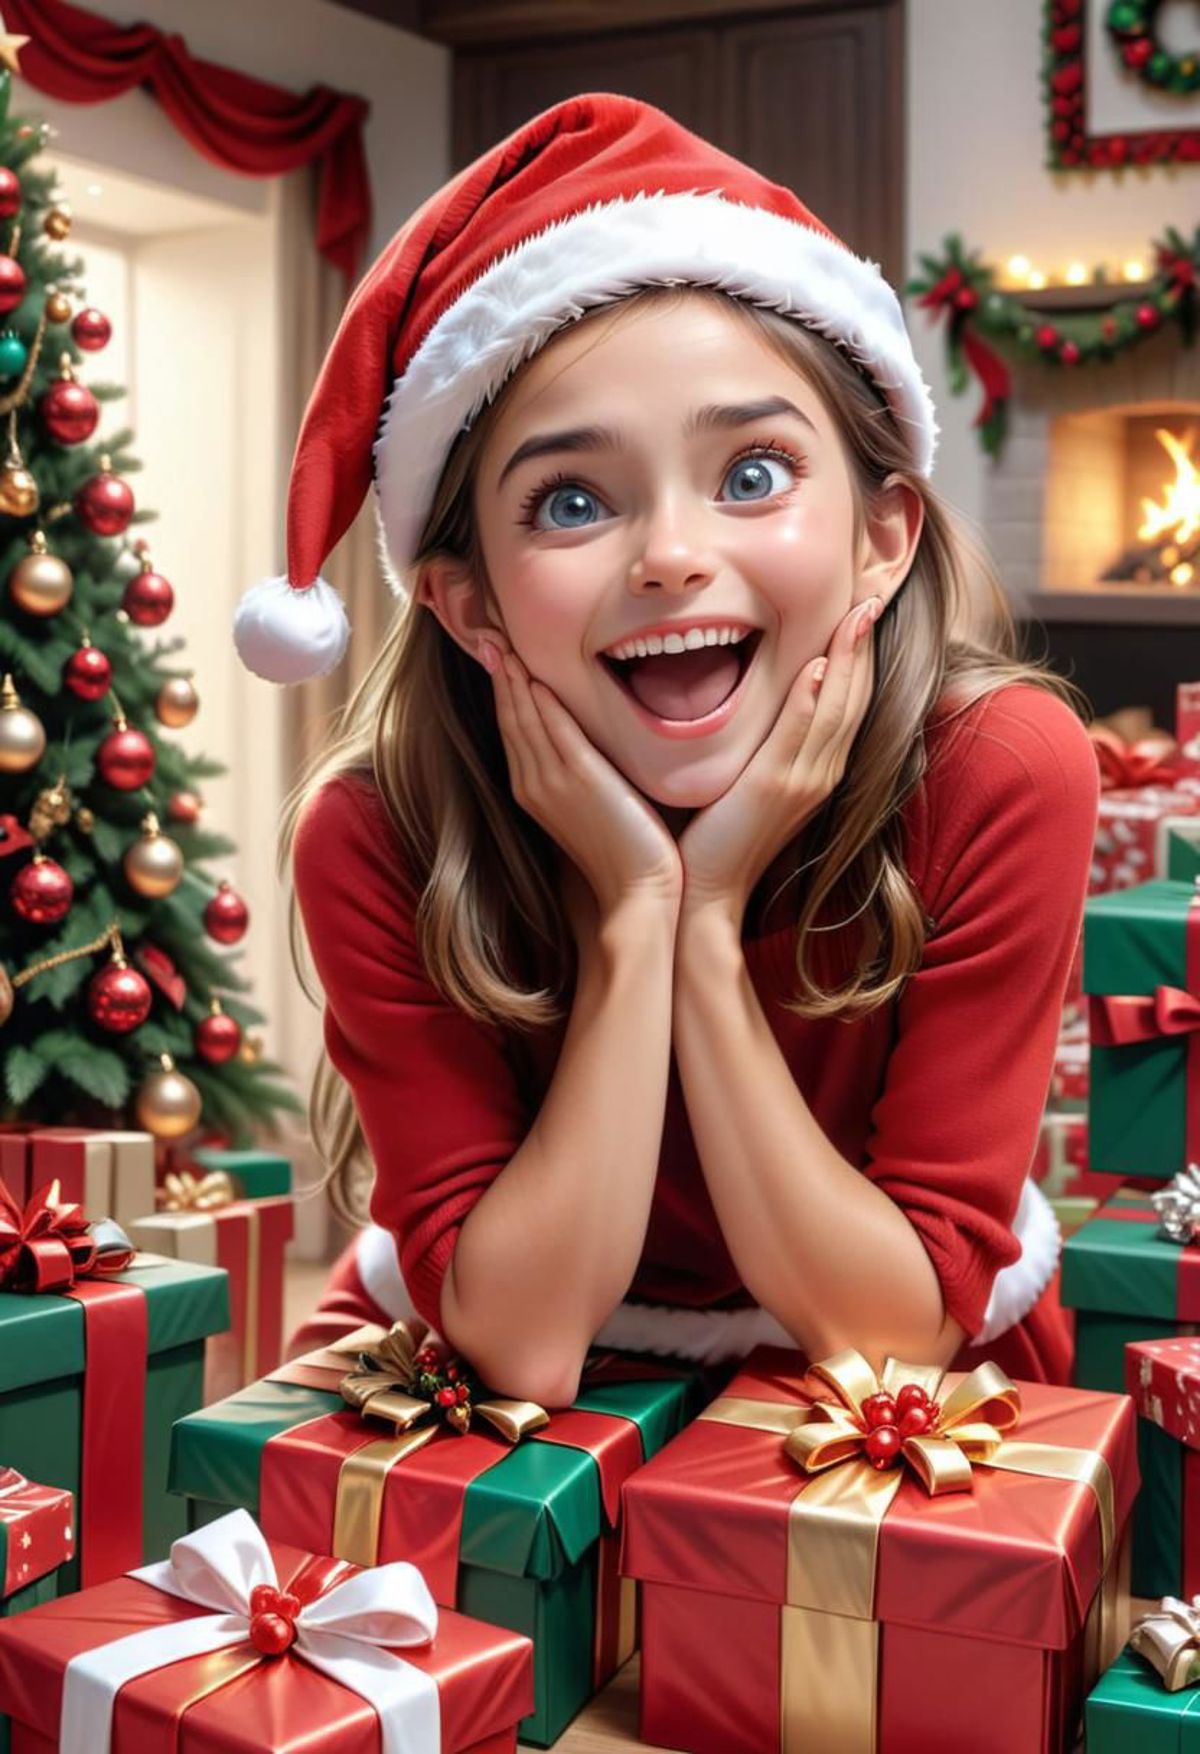 A happy young girl posing for a picture with a Christmas tree in the background.